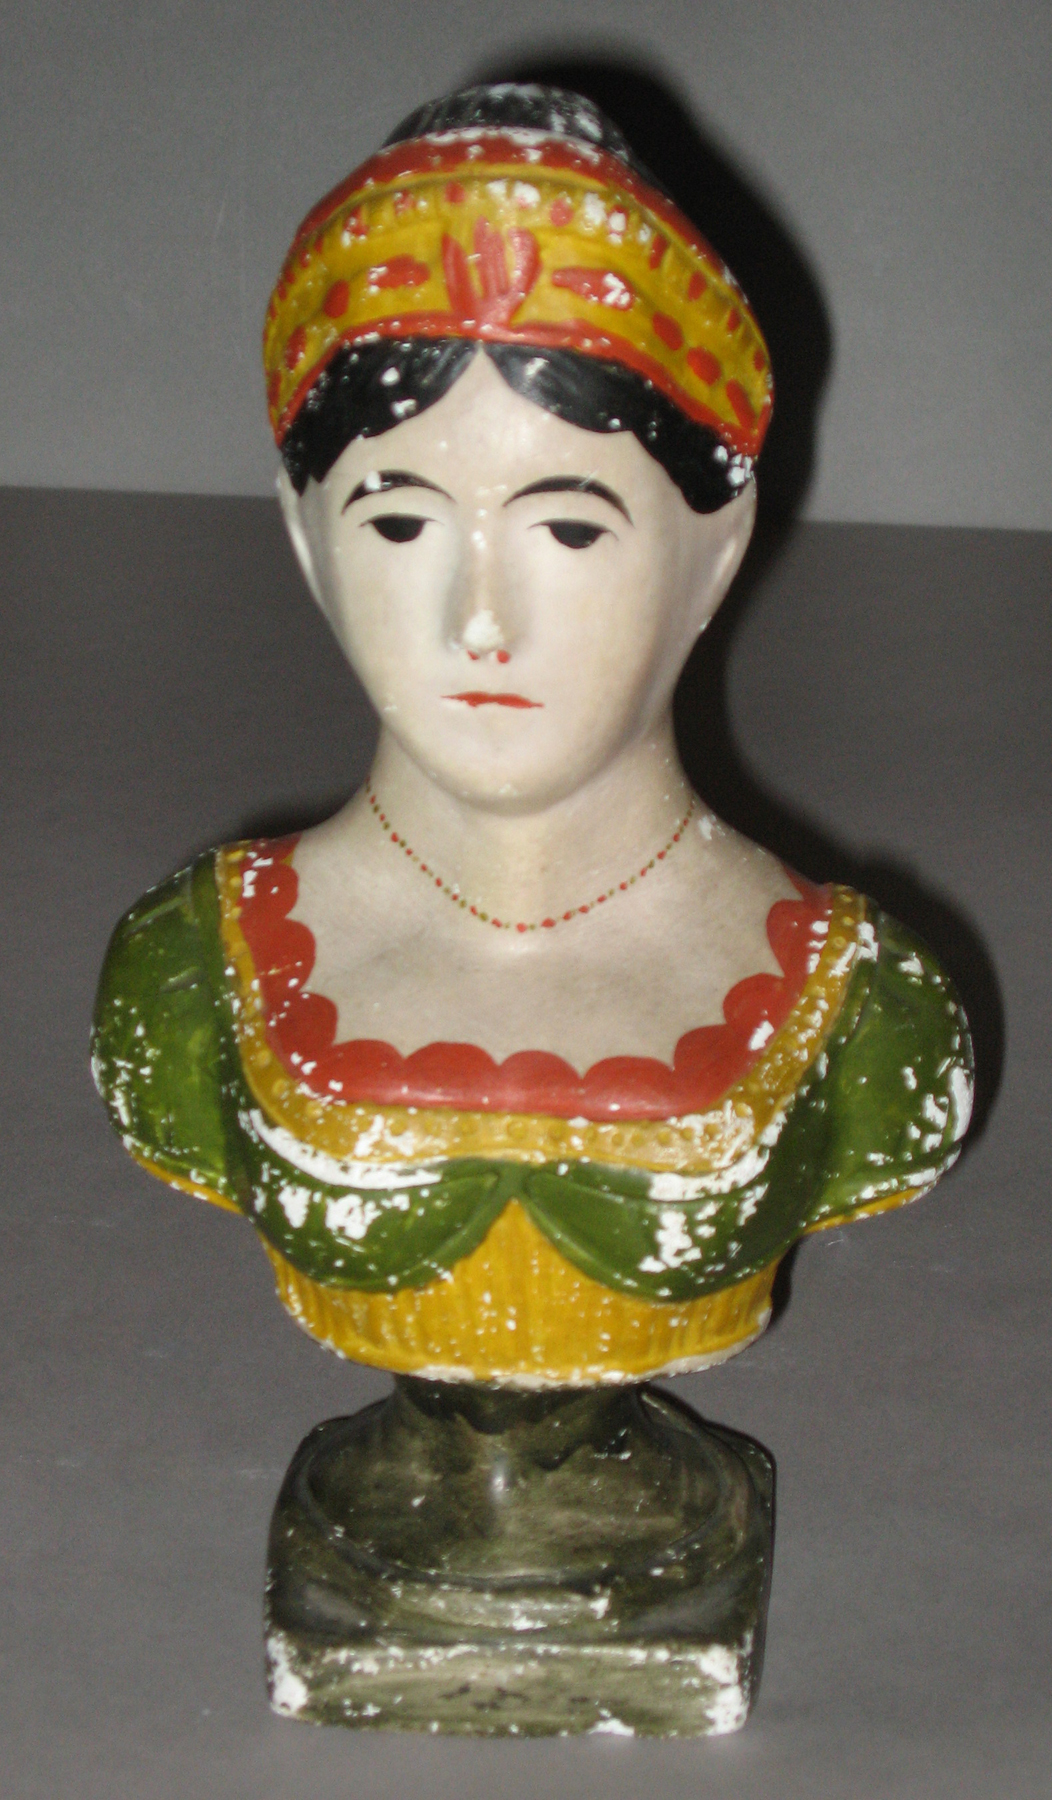 Bust (figure) - Woma...